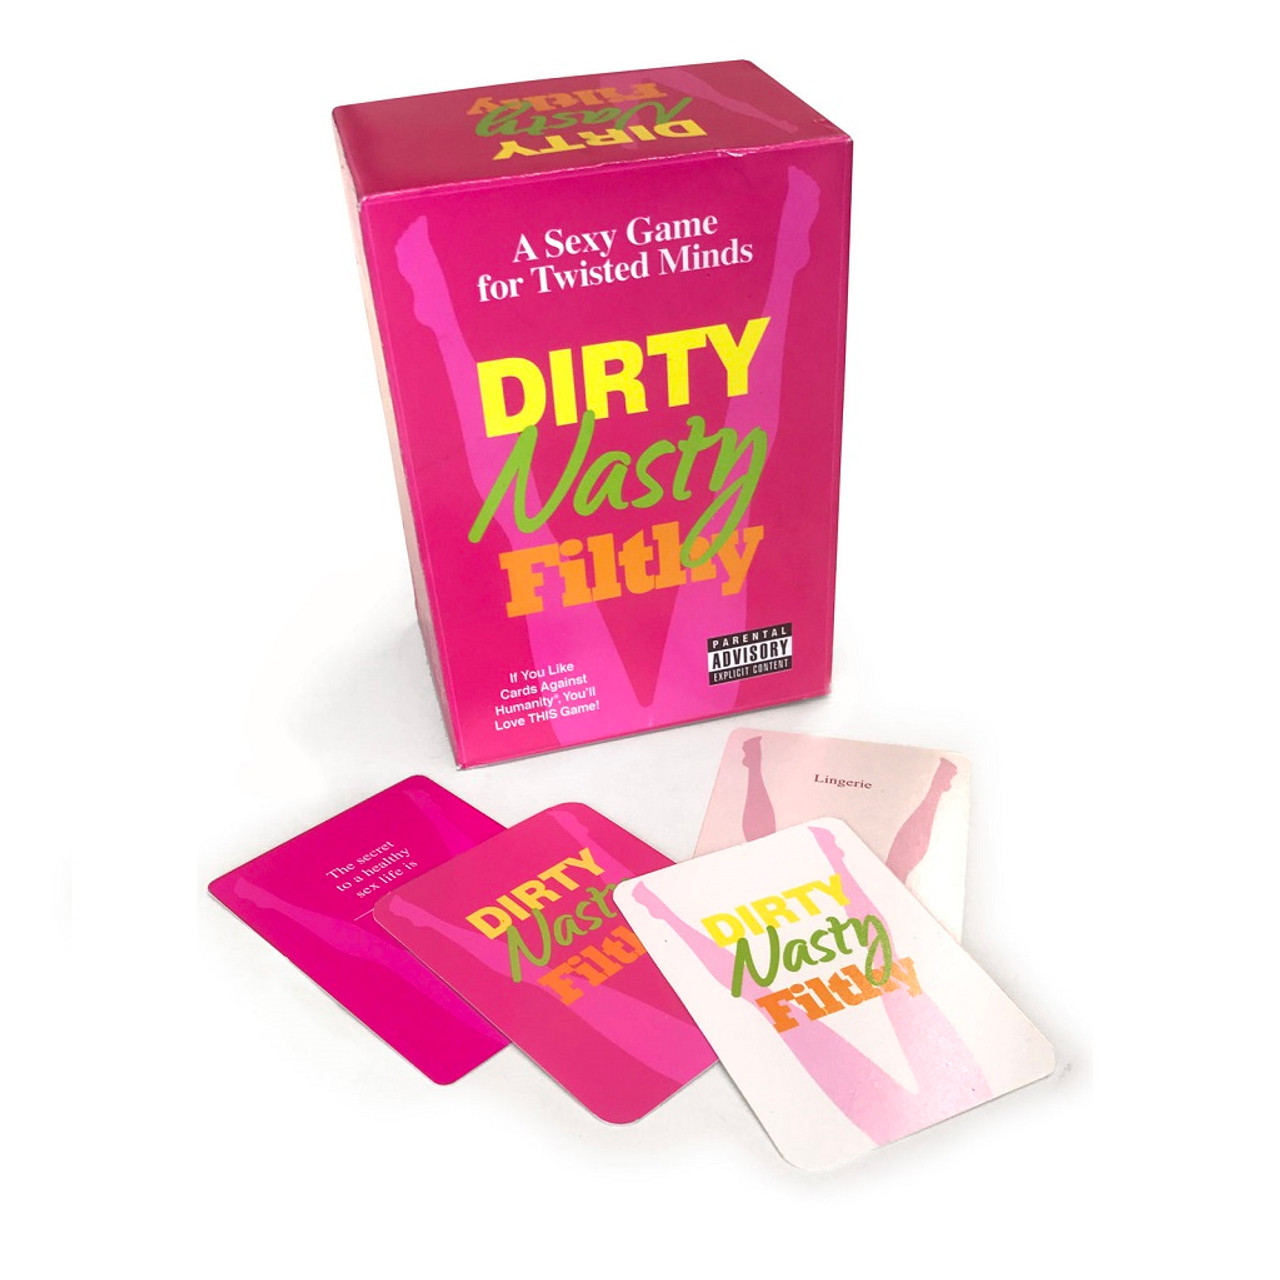 Dirty Nasty Filthy Card Game image